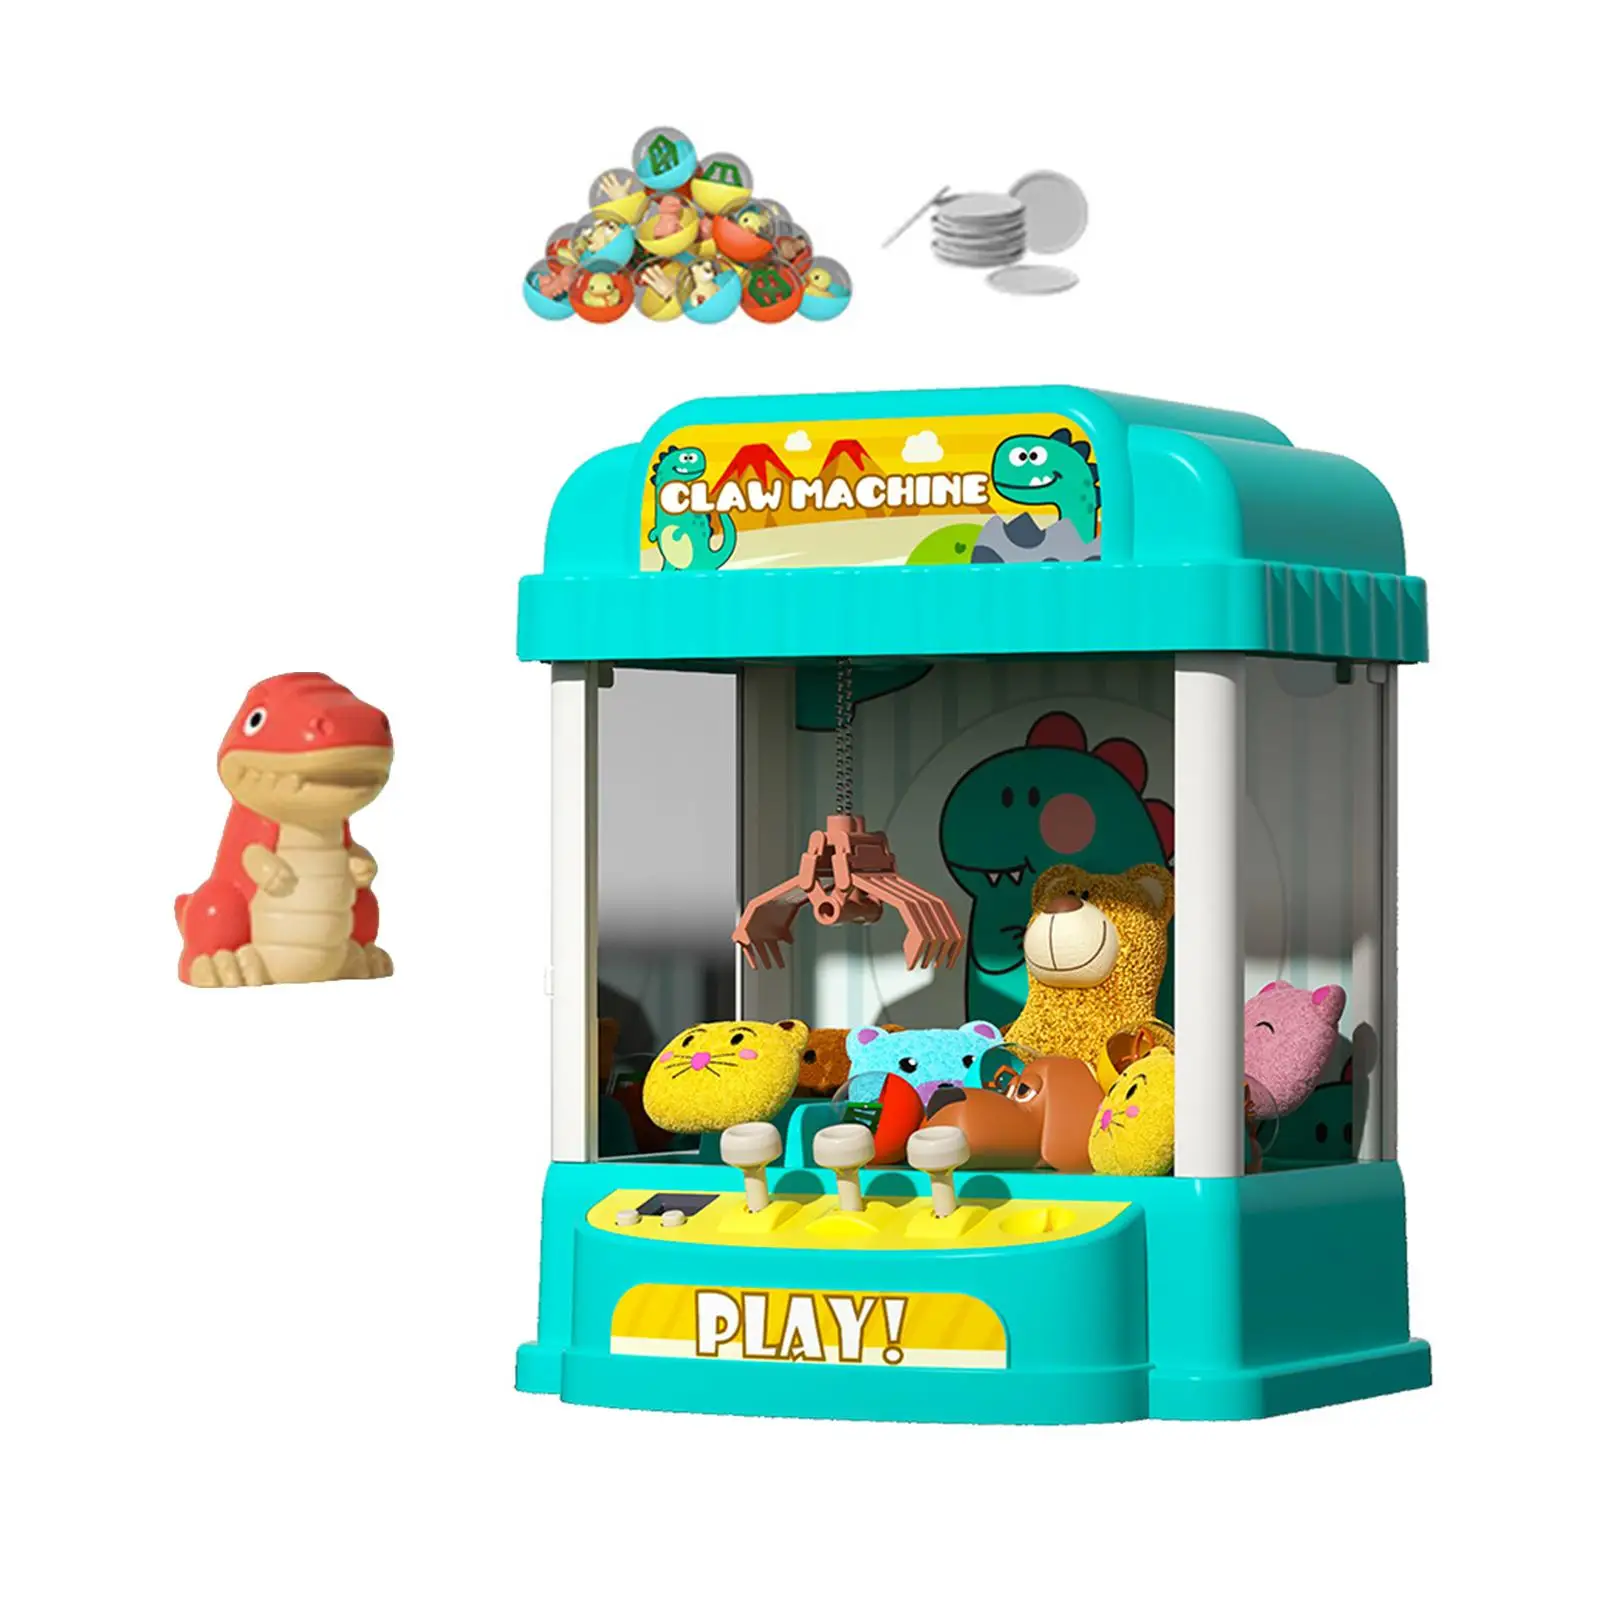 Portable Small Claw Machine Vending Grabber Machine Prize Dispenser with Sounds Electric Claw Machine for Kids Girls Boys Gifts